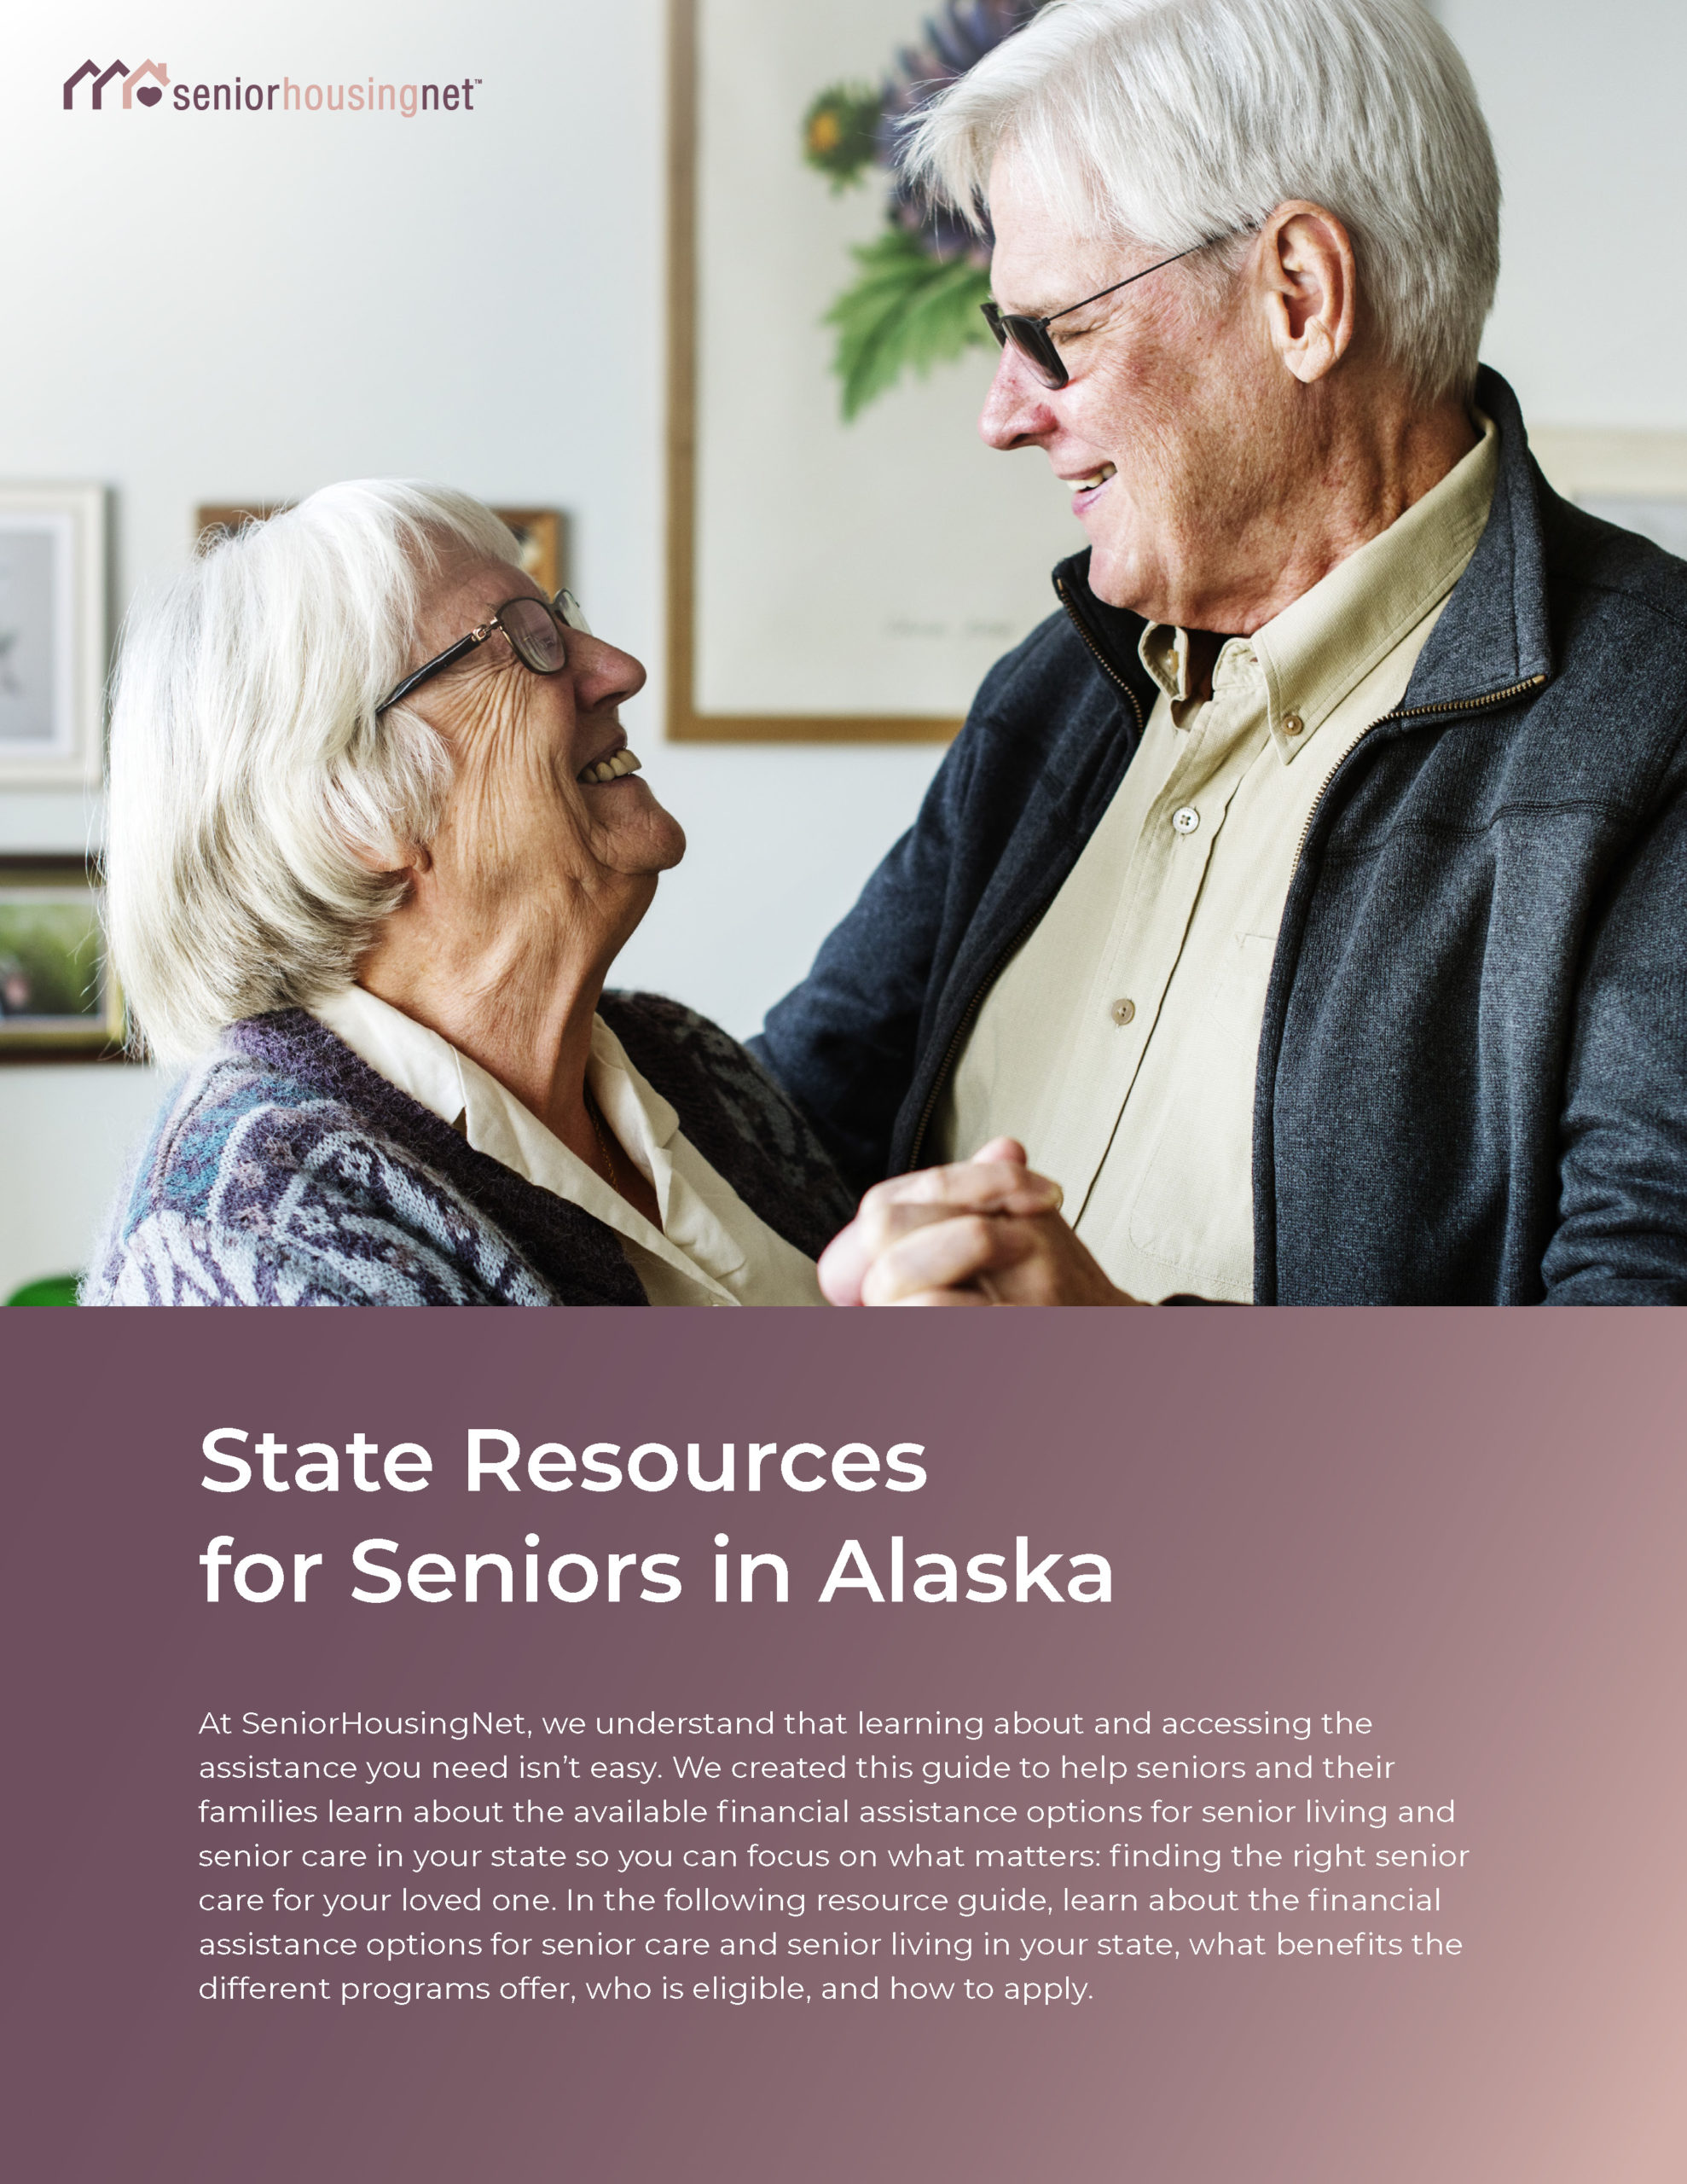 State Resources for Seniors in Alaska